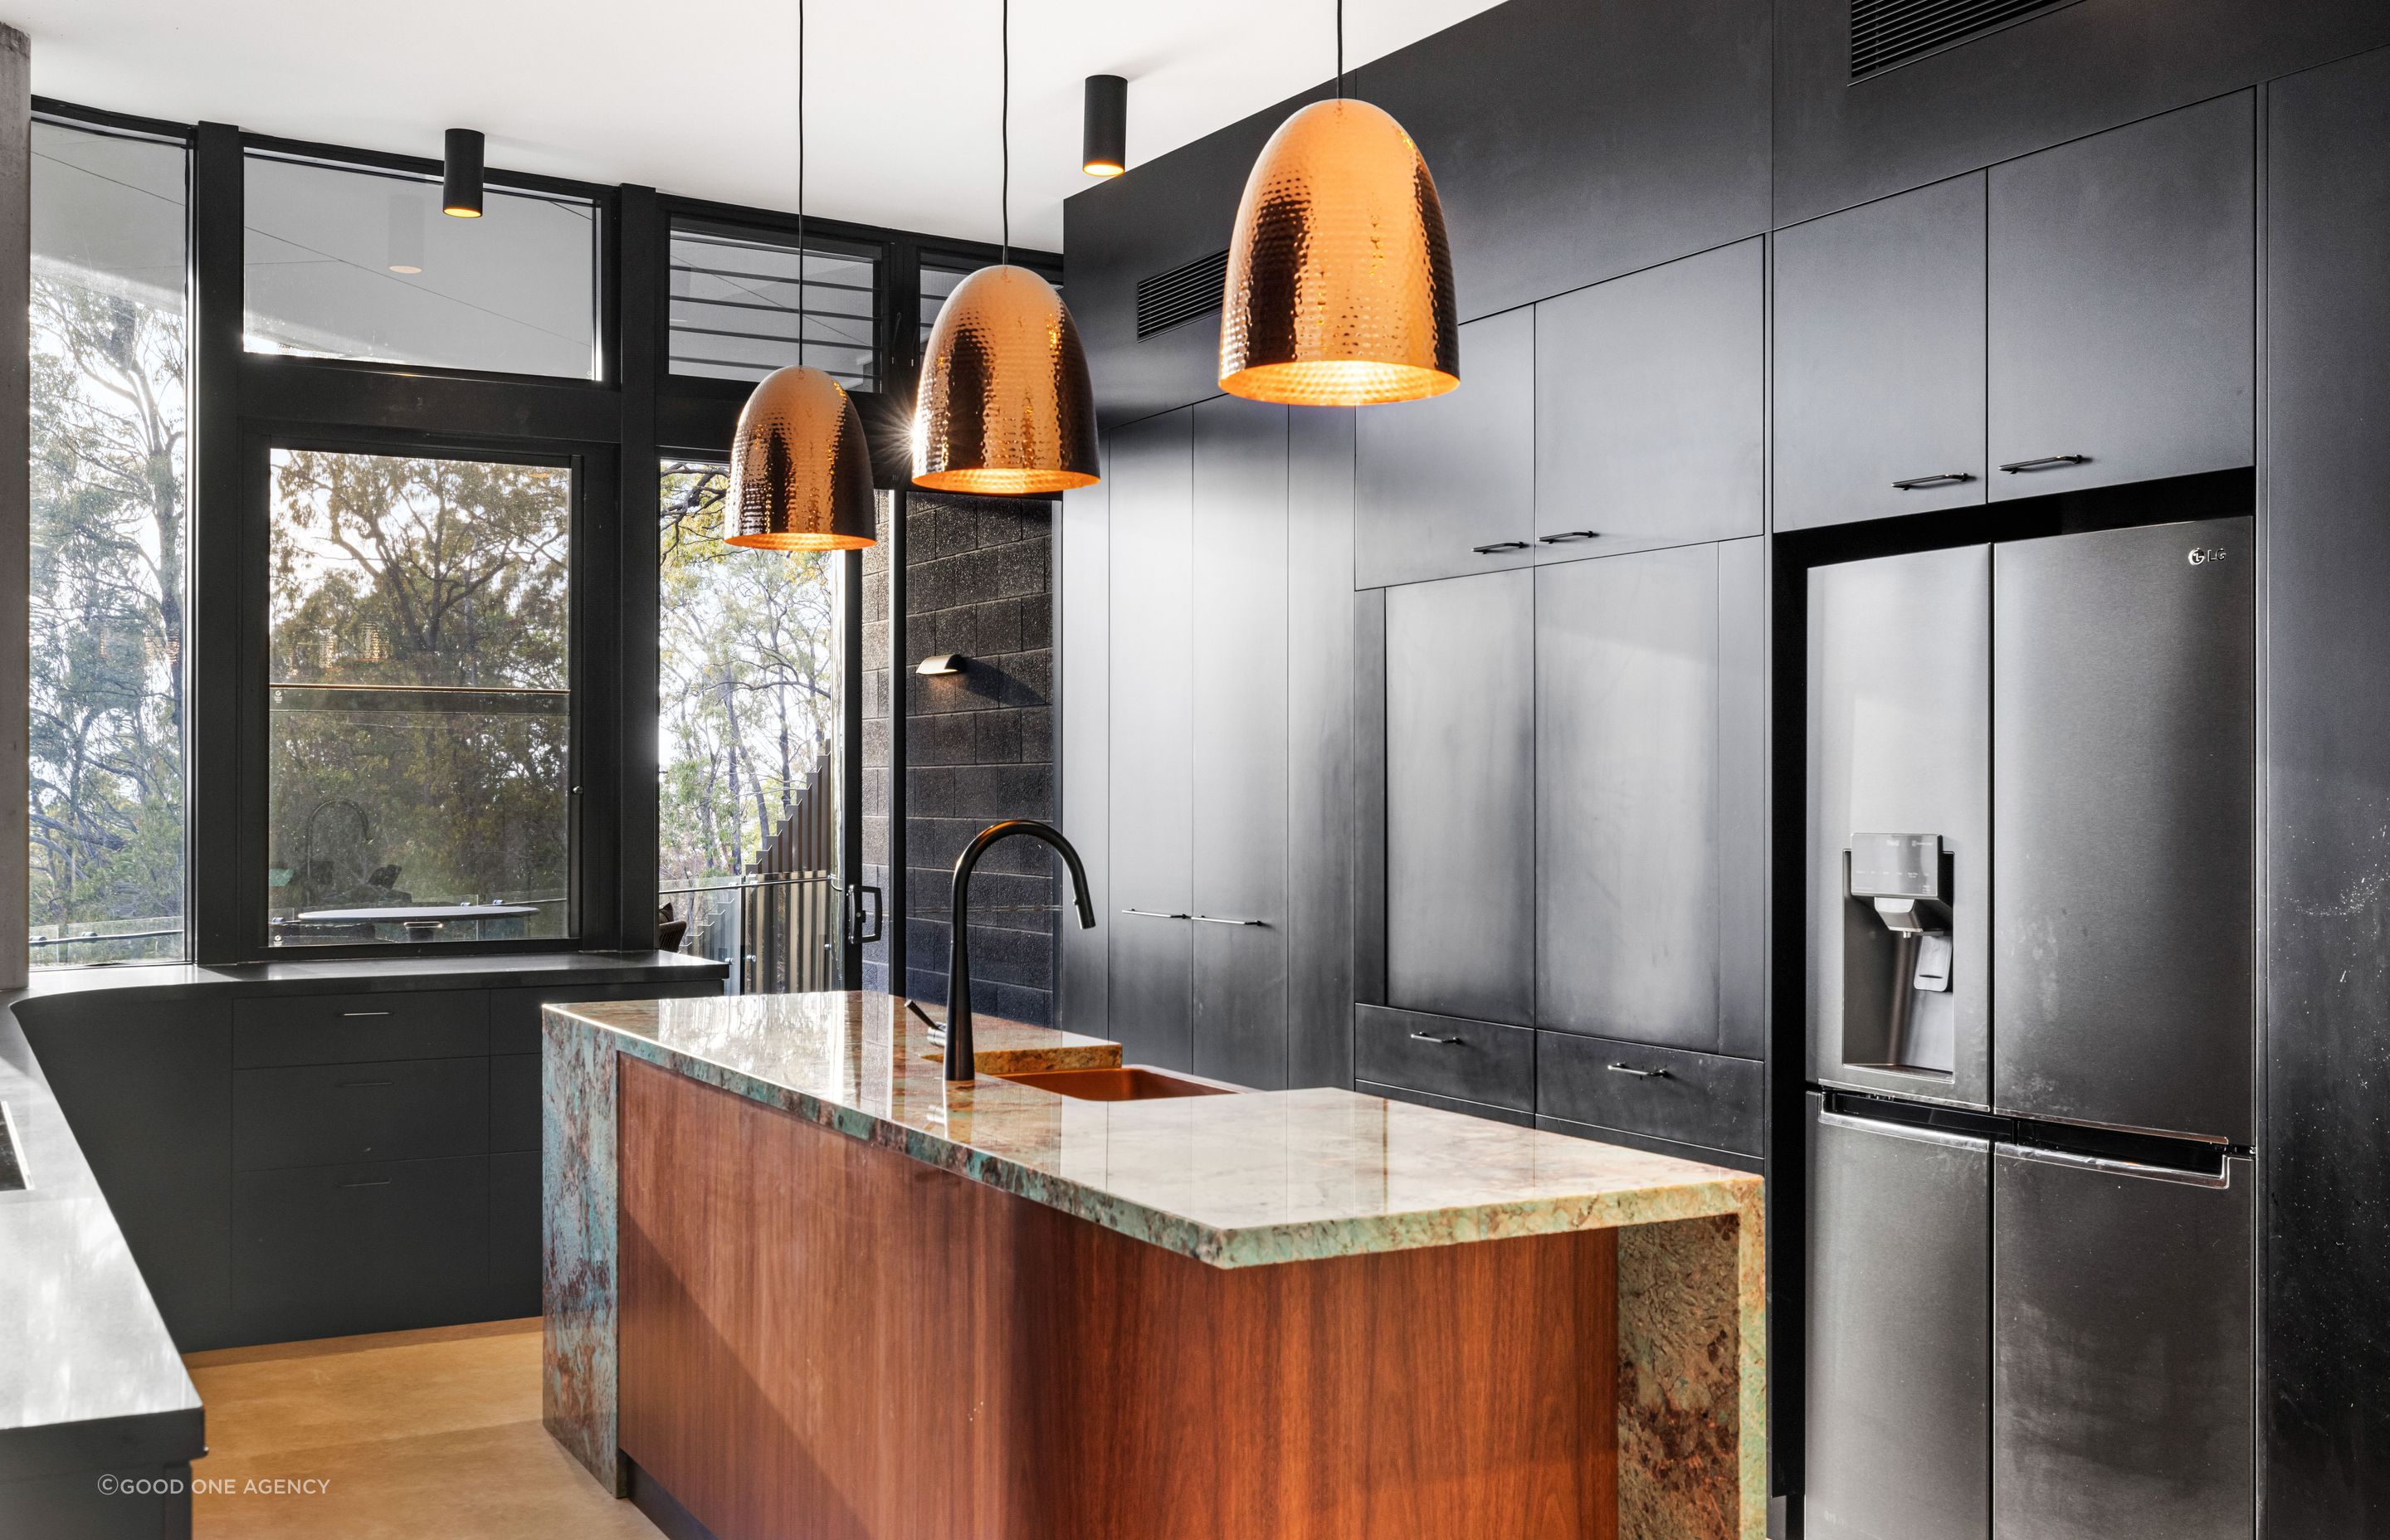 The dark cabinetry in the kitchen, contrasts against the timber veneer kitchen island and copper pendant lights.